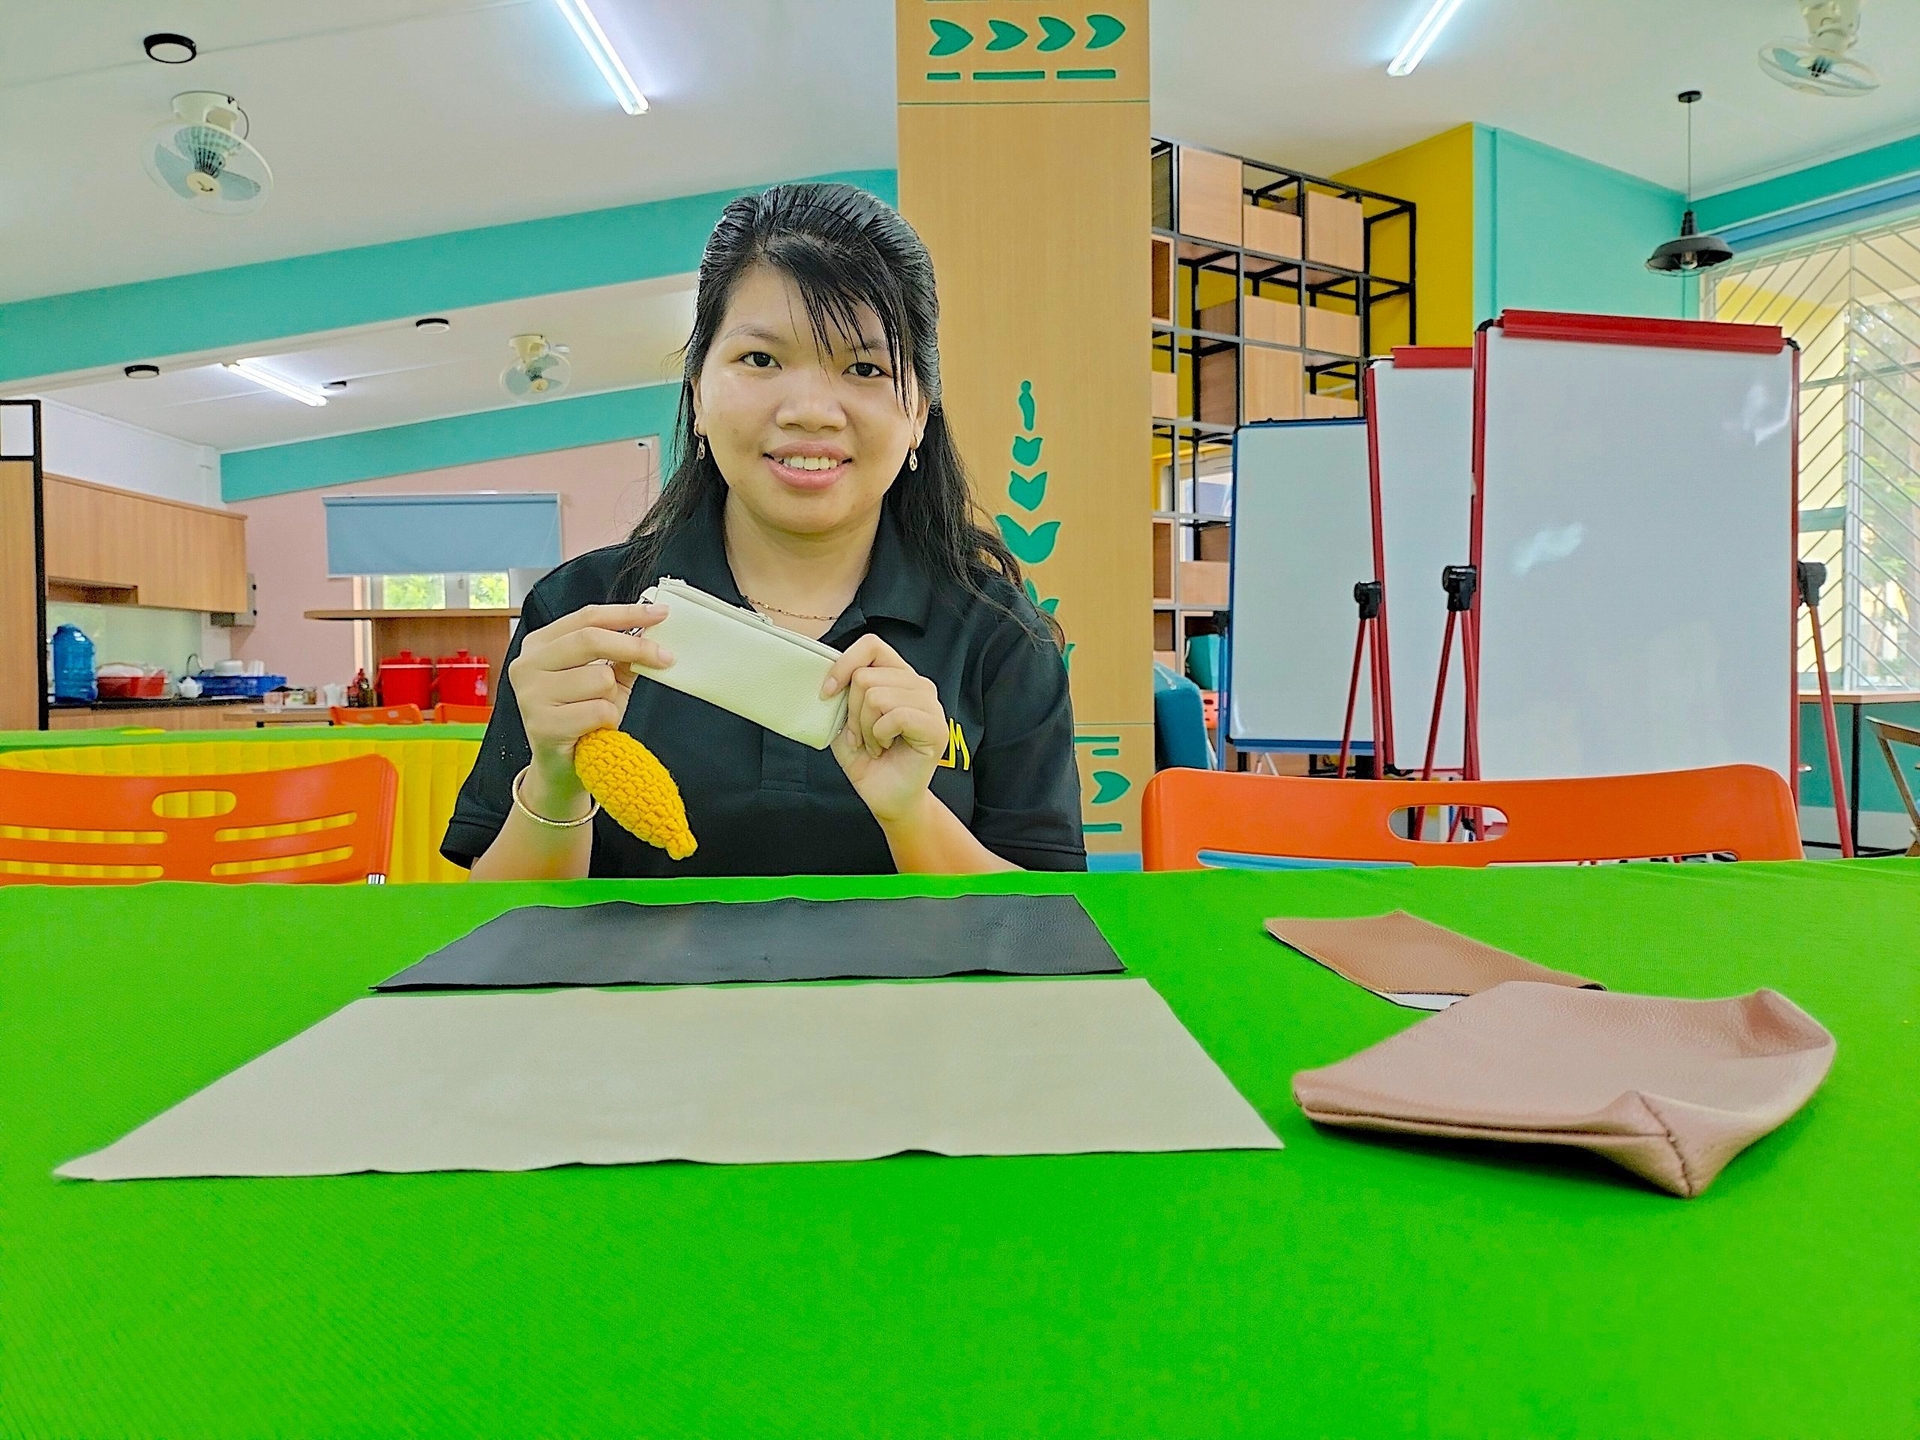 Nguyen Thi Thanh Van, creator of the startup idea for making artificial leather from mango peels. Photo: Minh Dam.